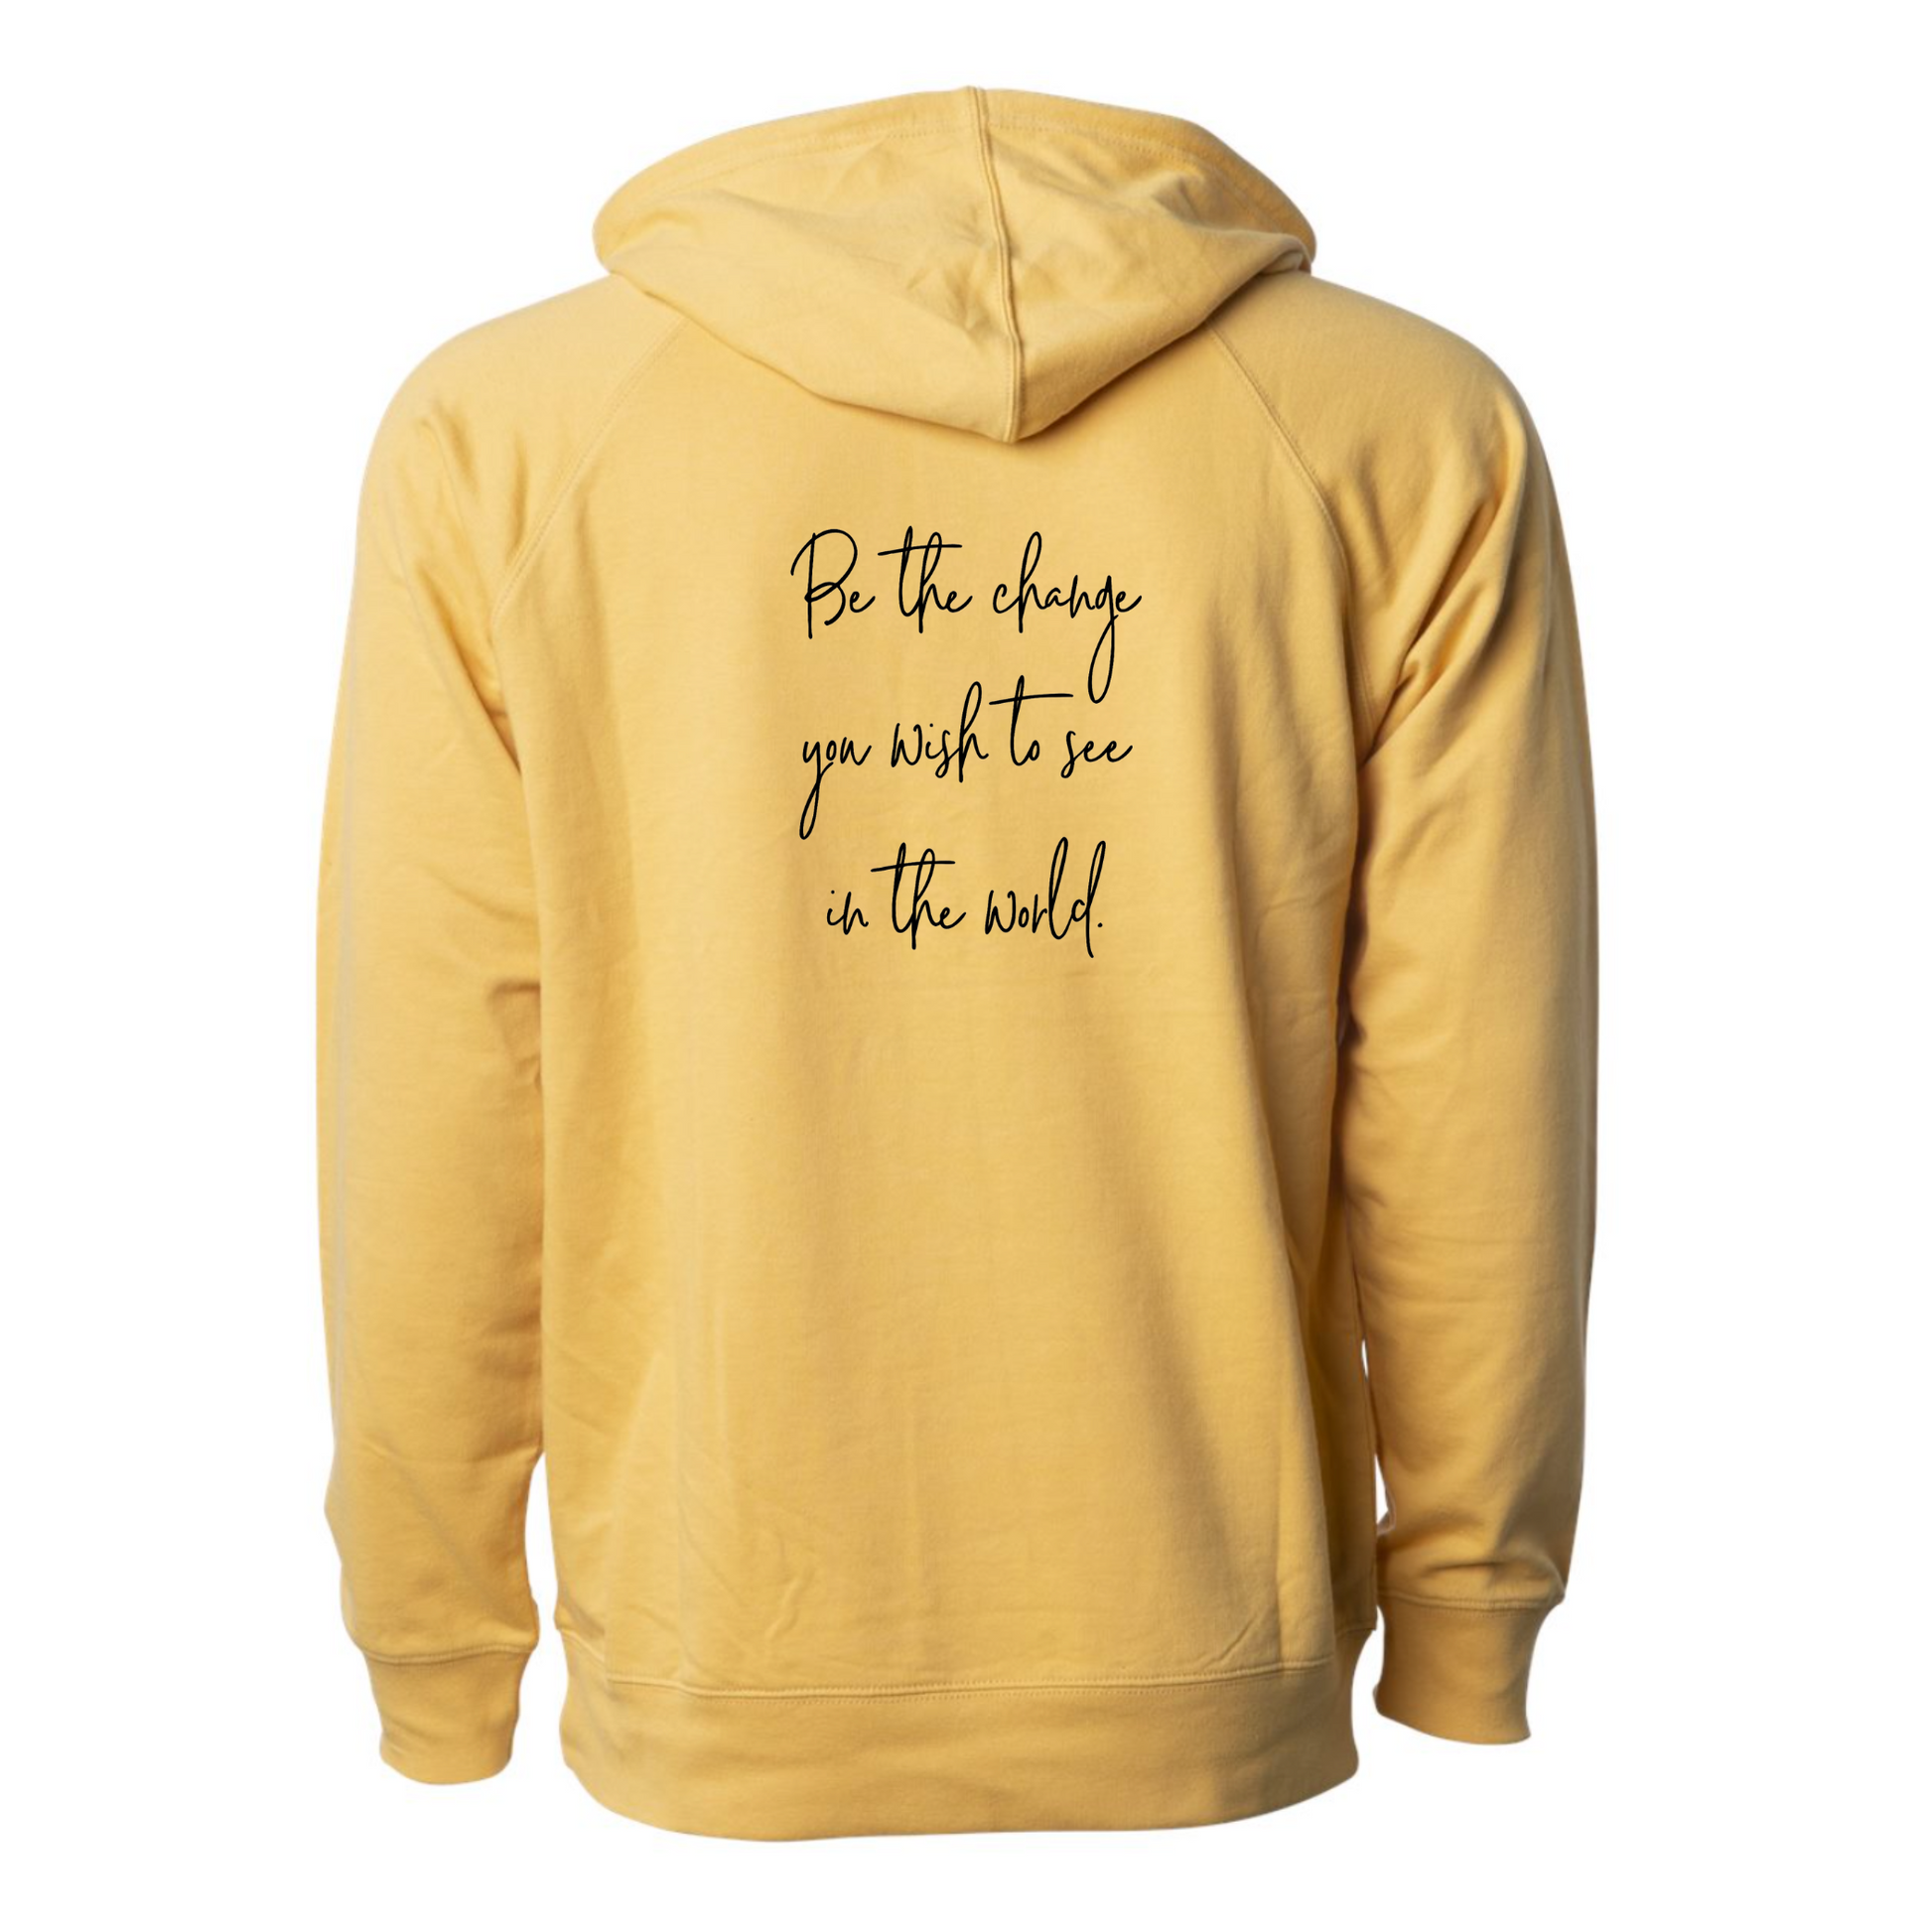 Be The Change Hooded Sweatshirt in a light yellow. The back has a black cursive writing saying "be the change you wish to see in the world." The front has a small flower with stem in black - pocket style. This is the back view of the sweatshirt.